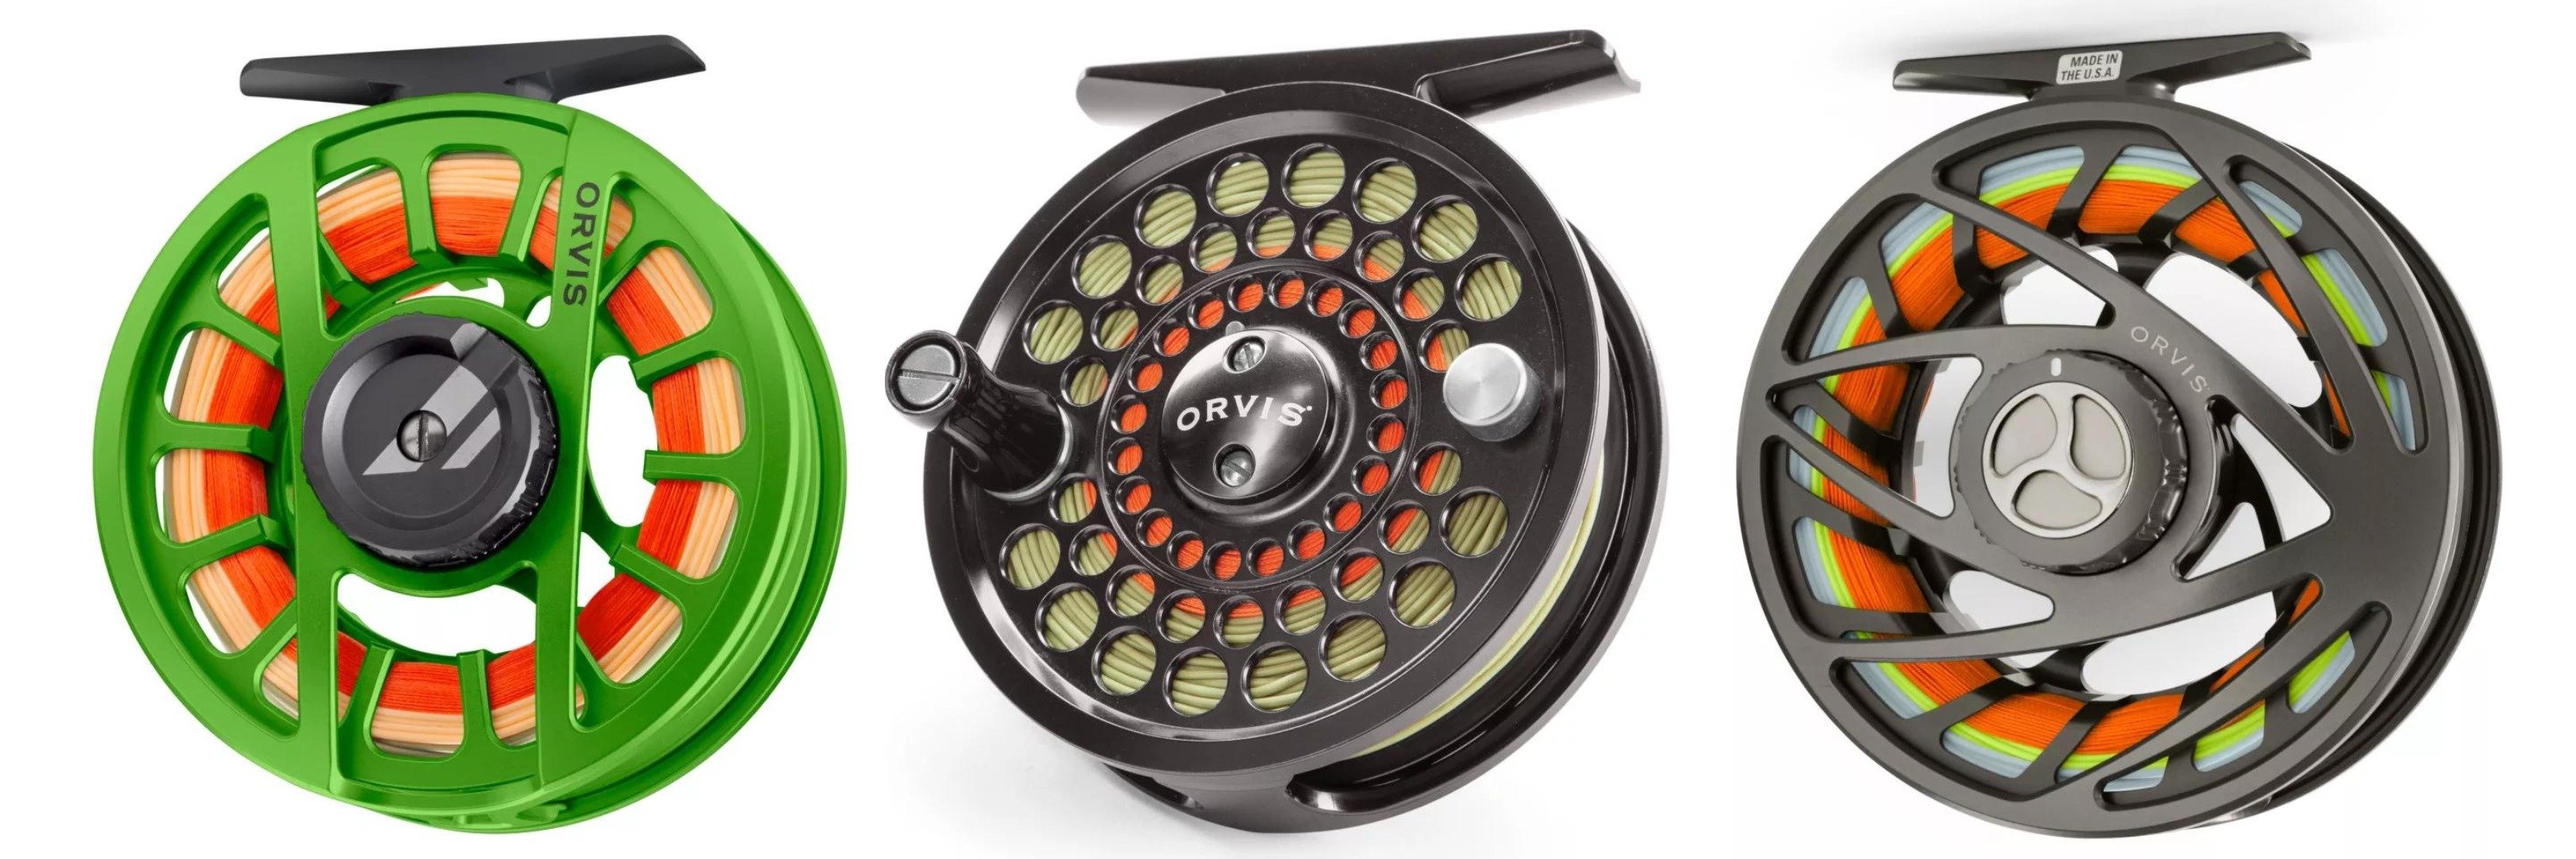 Orvis Clearwater 3wt 10'0 Nymph Outfit Package | Hydros Nymph Line,  Battenkill